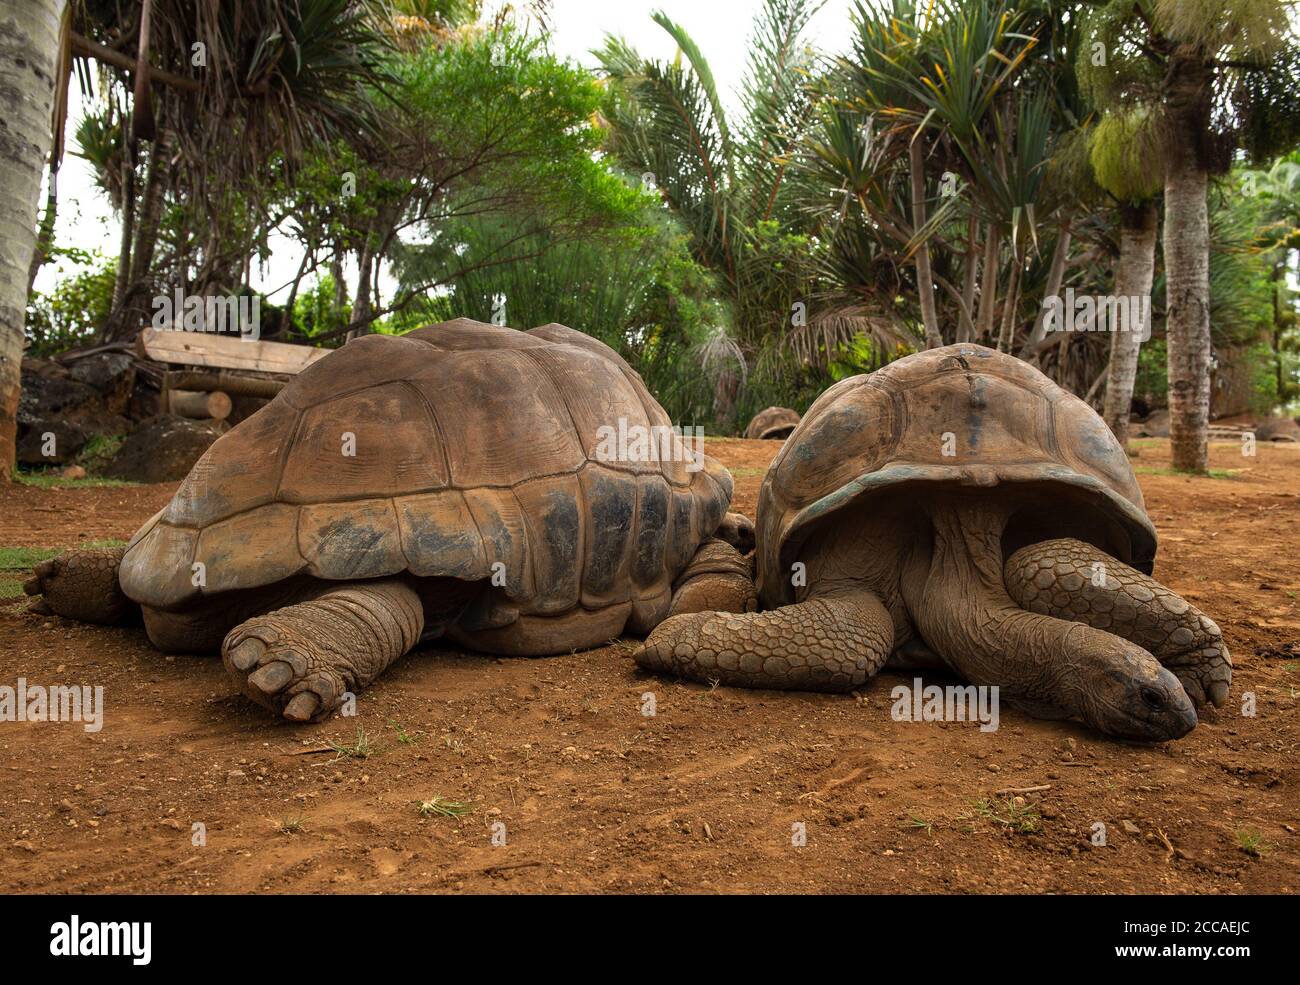 Giant turtles (Dipsochelys gigantea) under the palm trees in tropical park in Mauritius Stock Photo